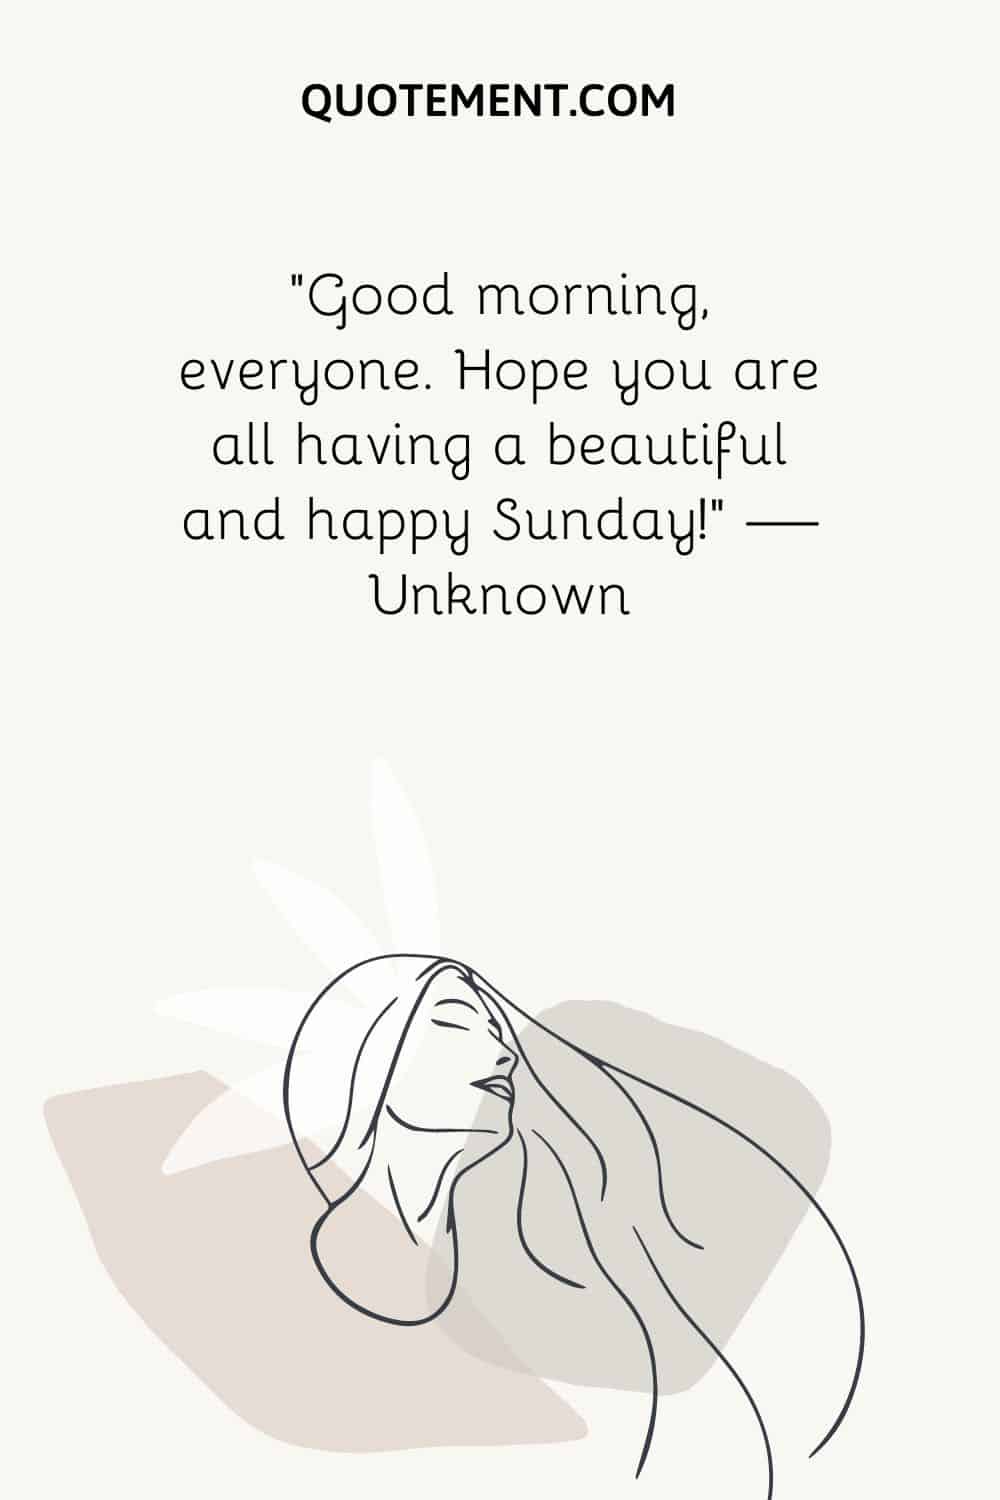 “Good morning, everyone. Hope you are all having a beautiful and happy Sunday!” — Unknown